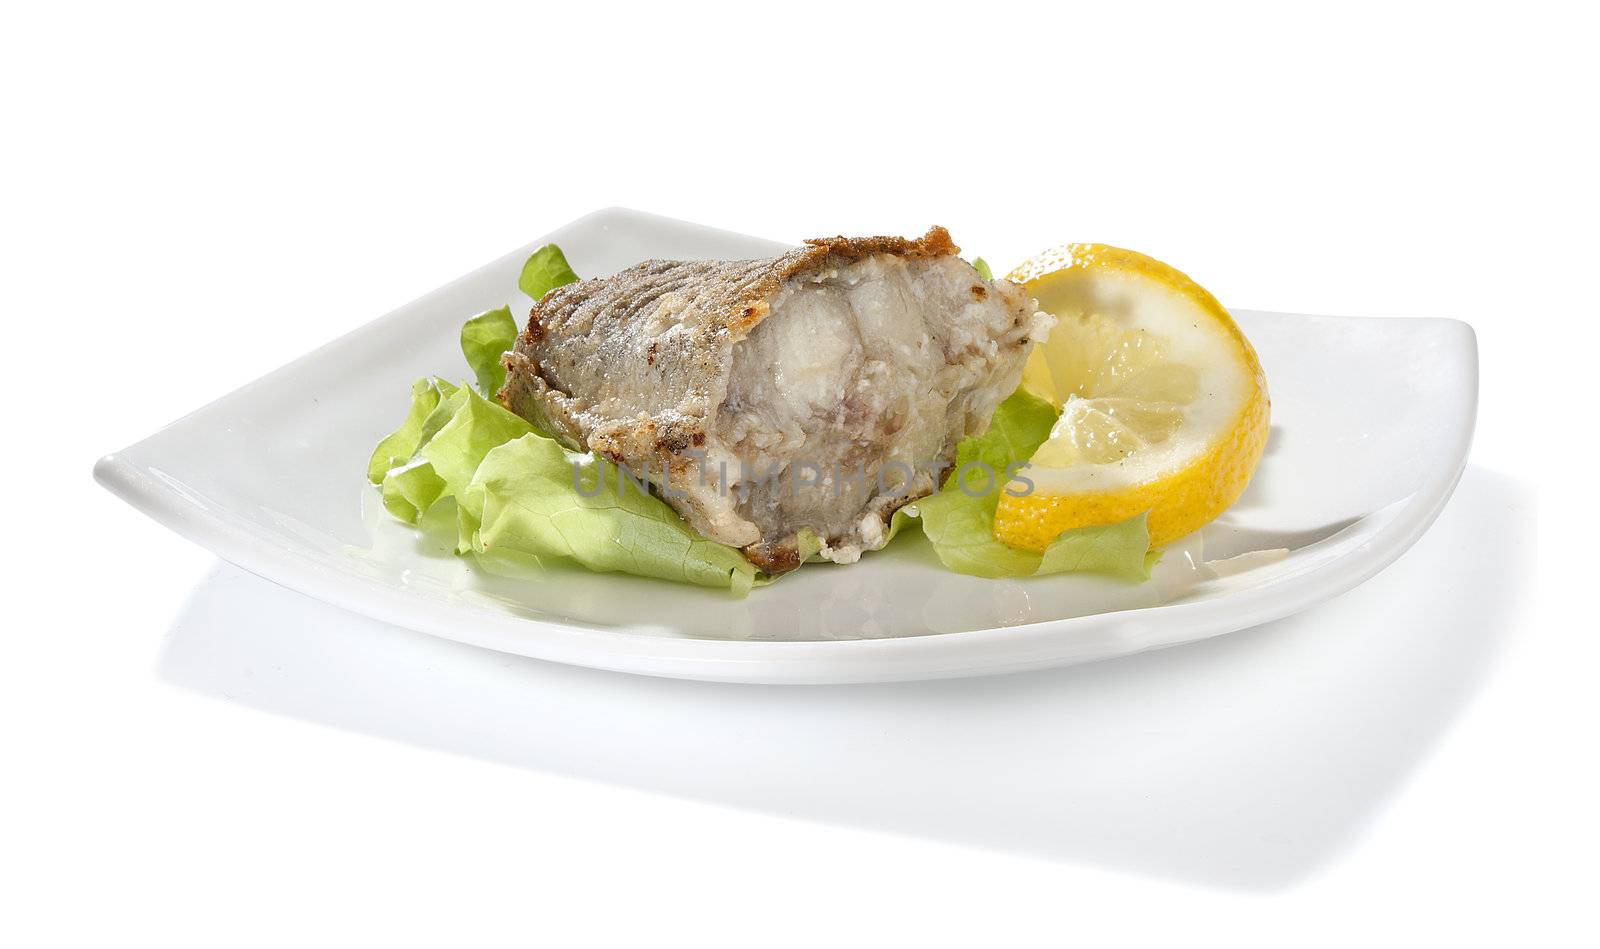 Fried piece of cod with lettuce and lemon on the plate